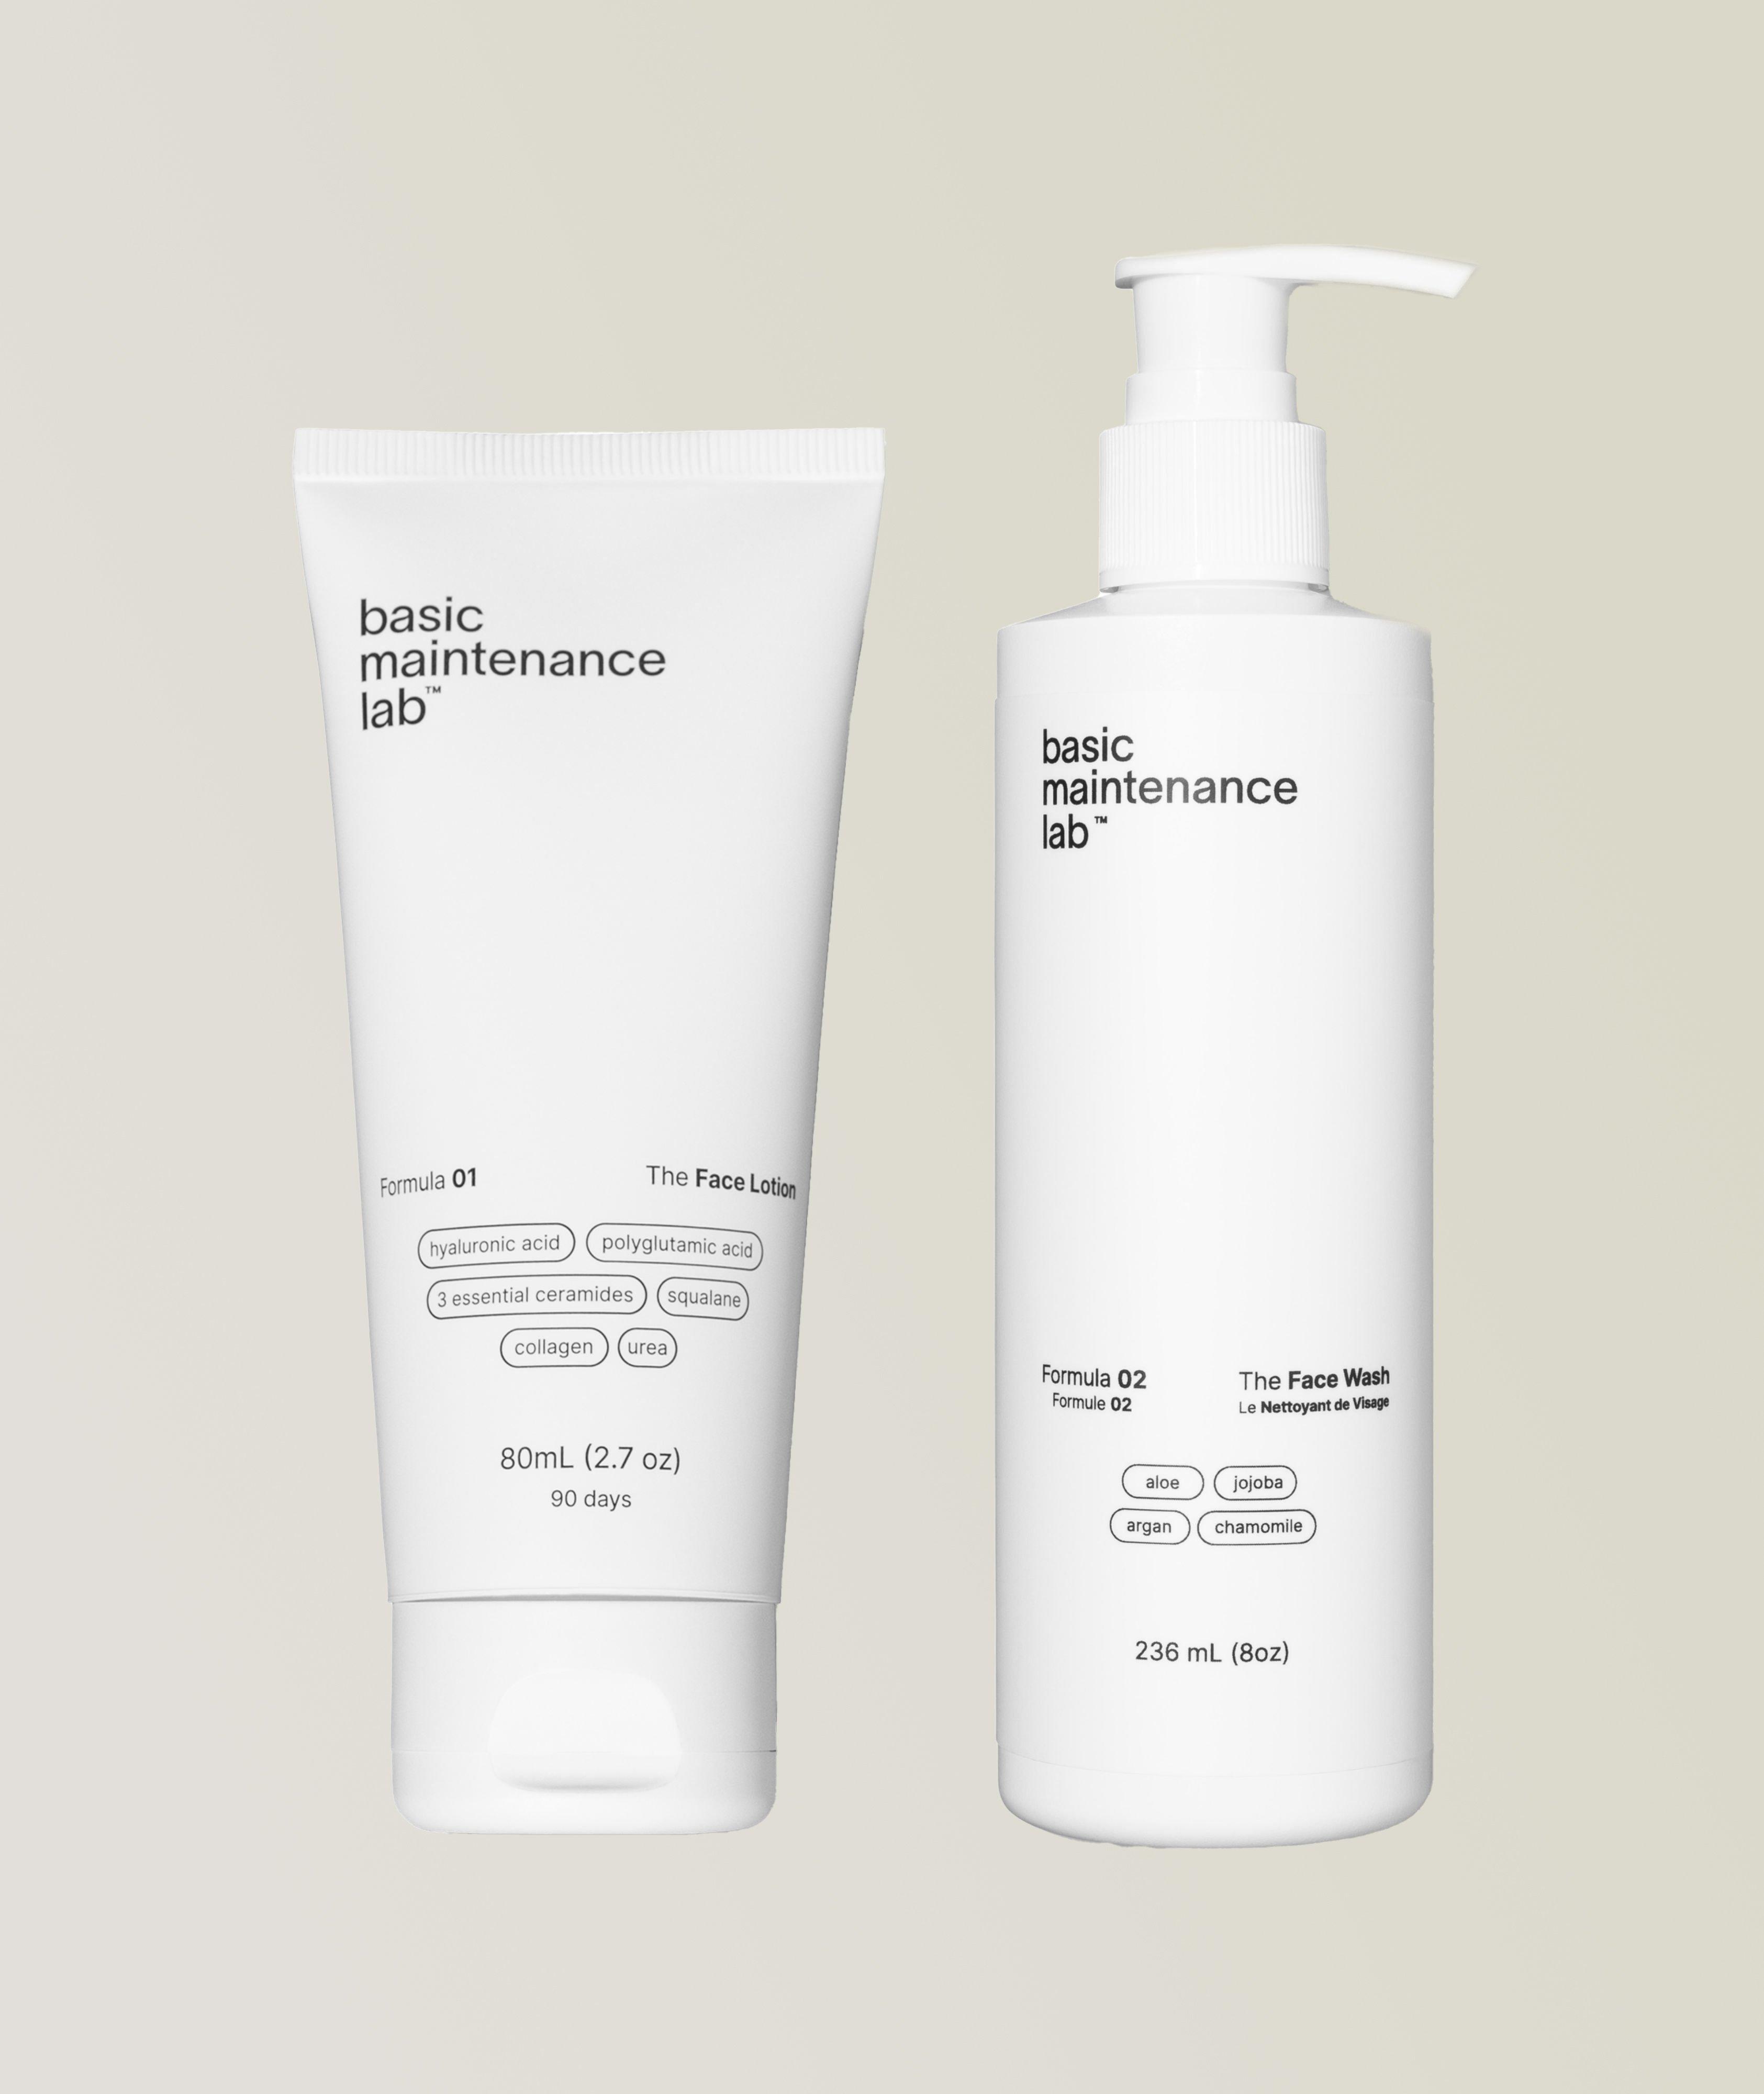 The Routine: The Face Lotion + The Face Wash